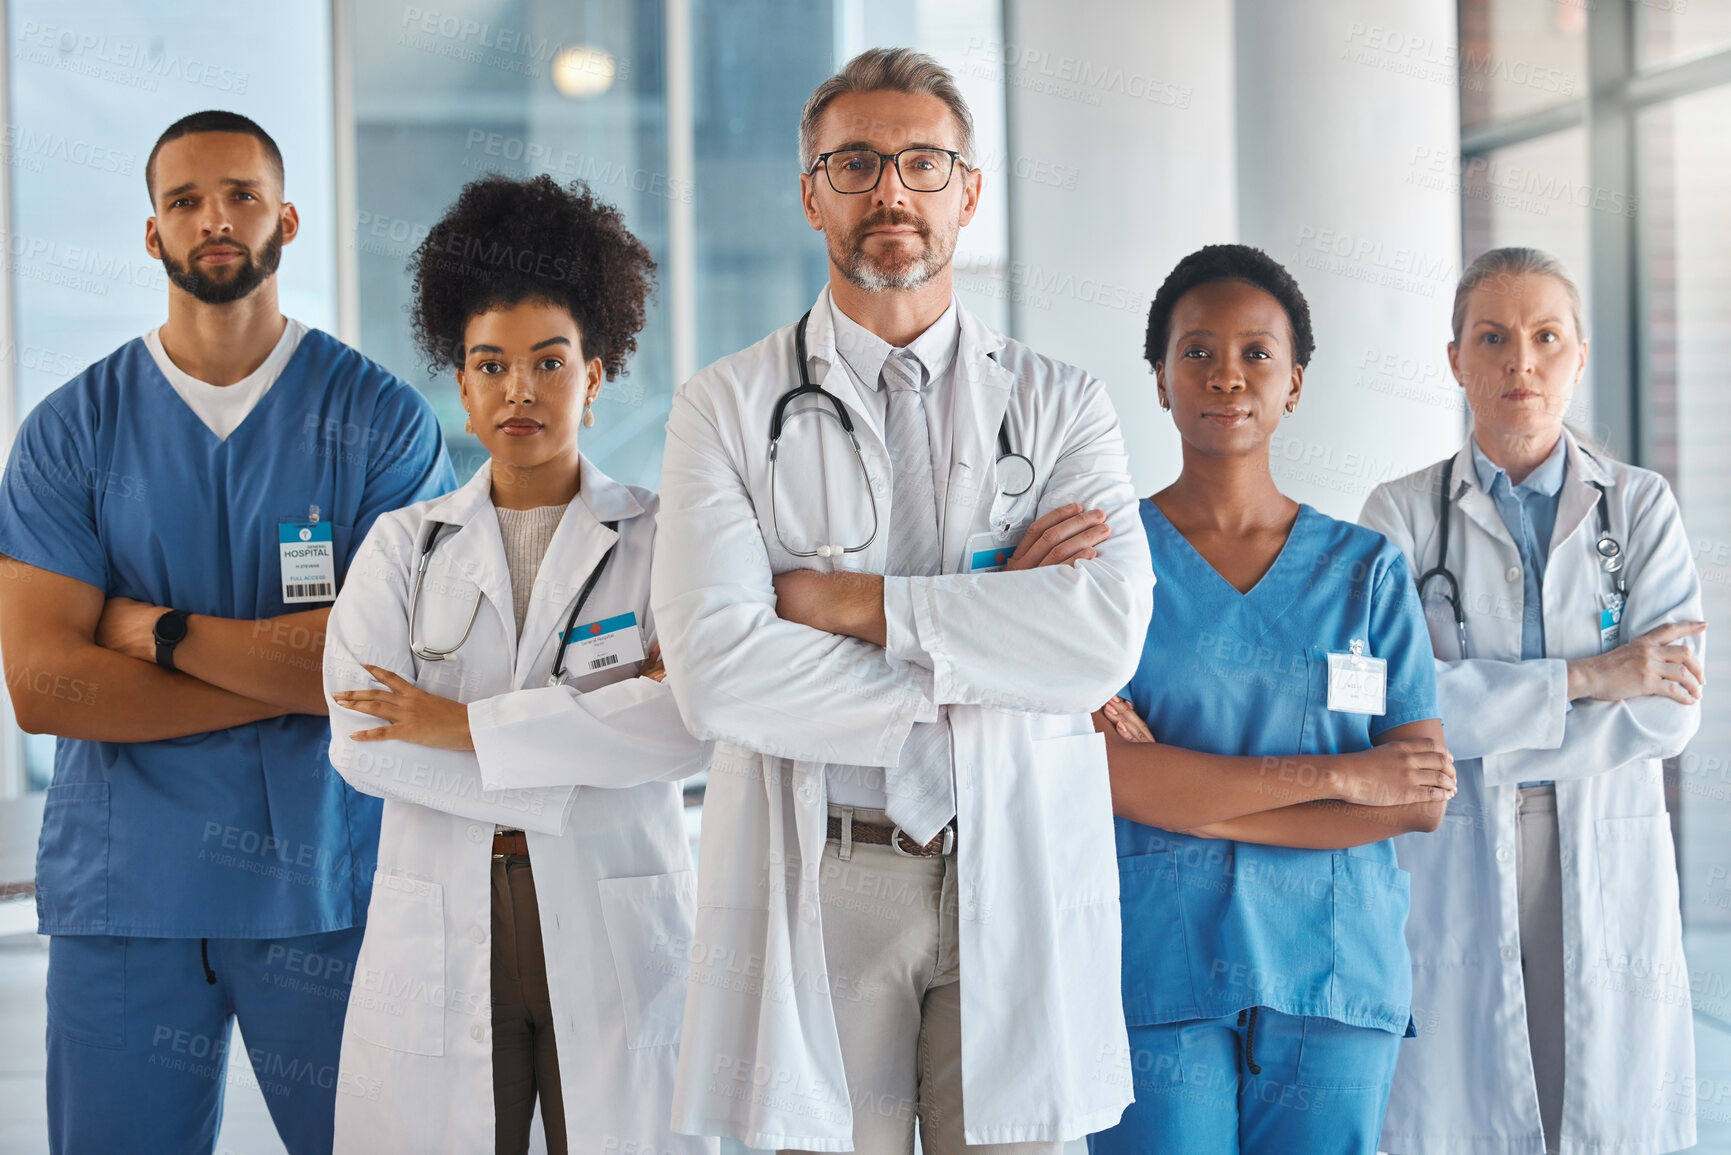 Buy stock photo Doctors, nurses and team portrait in hospital, clinic or medical office. Diversity, health and healthcare professionals standing together arms crossed in confidence teamwork, collaboration or support